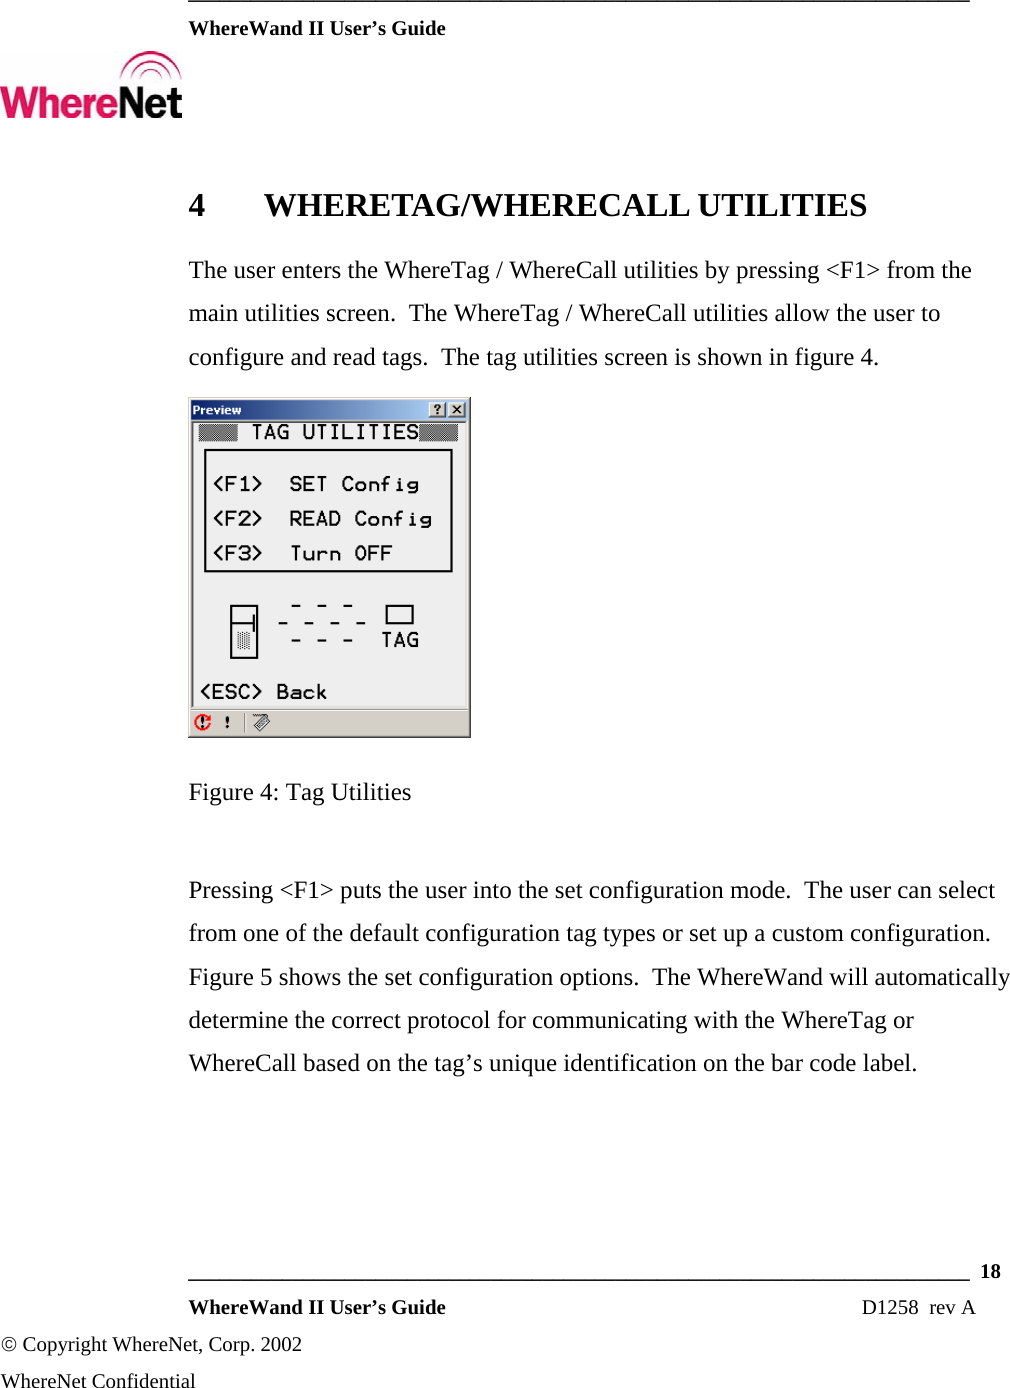  ___________________________________________________________________________  WhereWand II User’s Guide     ___________________________________________________________________________  18  WhereWand II User’s Guide                                                                          D1258  rev A © Copyright WhereNet, Corp. 2002  WhereNet Confidential 4 WHERETAG/WHERECALL UTILITIES The user enters the WhereTag / WhereCall utilities by pressing &lt;F1&gt; from the main utilities screen.  The WhereTag / WhereCall utilities allow the user to configure and read tags.  The tag utilities screen is shown in figure 4.  Figure 4: Tag Utilities  Pressing &lt;F1&gt; puts the user into the set configuration mode.  The user can select from one of the default configuration tag types or set up a custom configuration.  Figure 5 shows the set configuration options.  The WhereWand will automatically determine the correct protocol for communicating with the WhereTag or WhereCall based on the tag’s unique identification on the bar code label. 